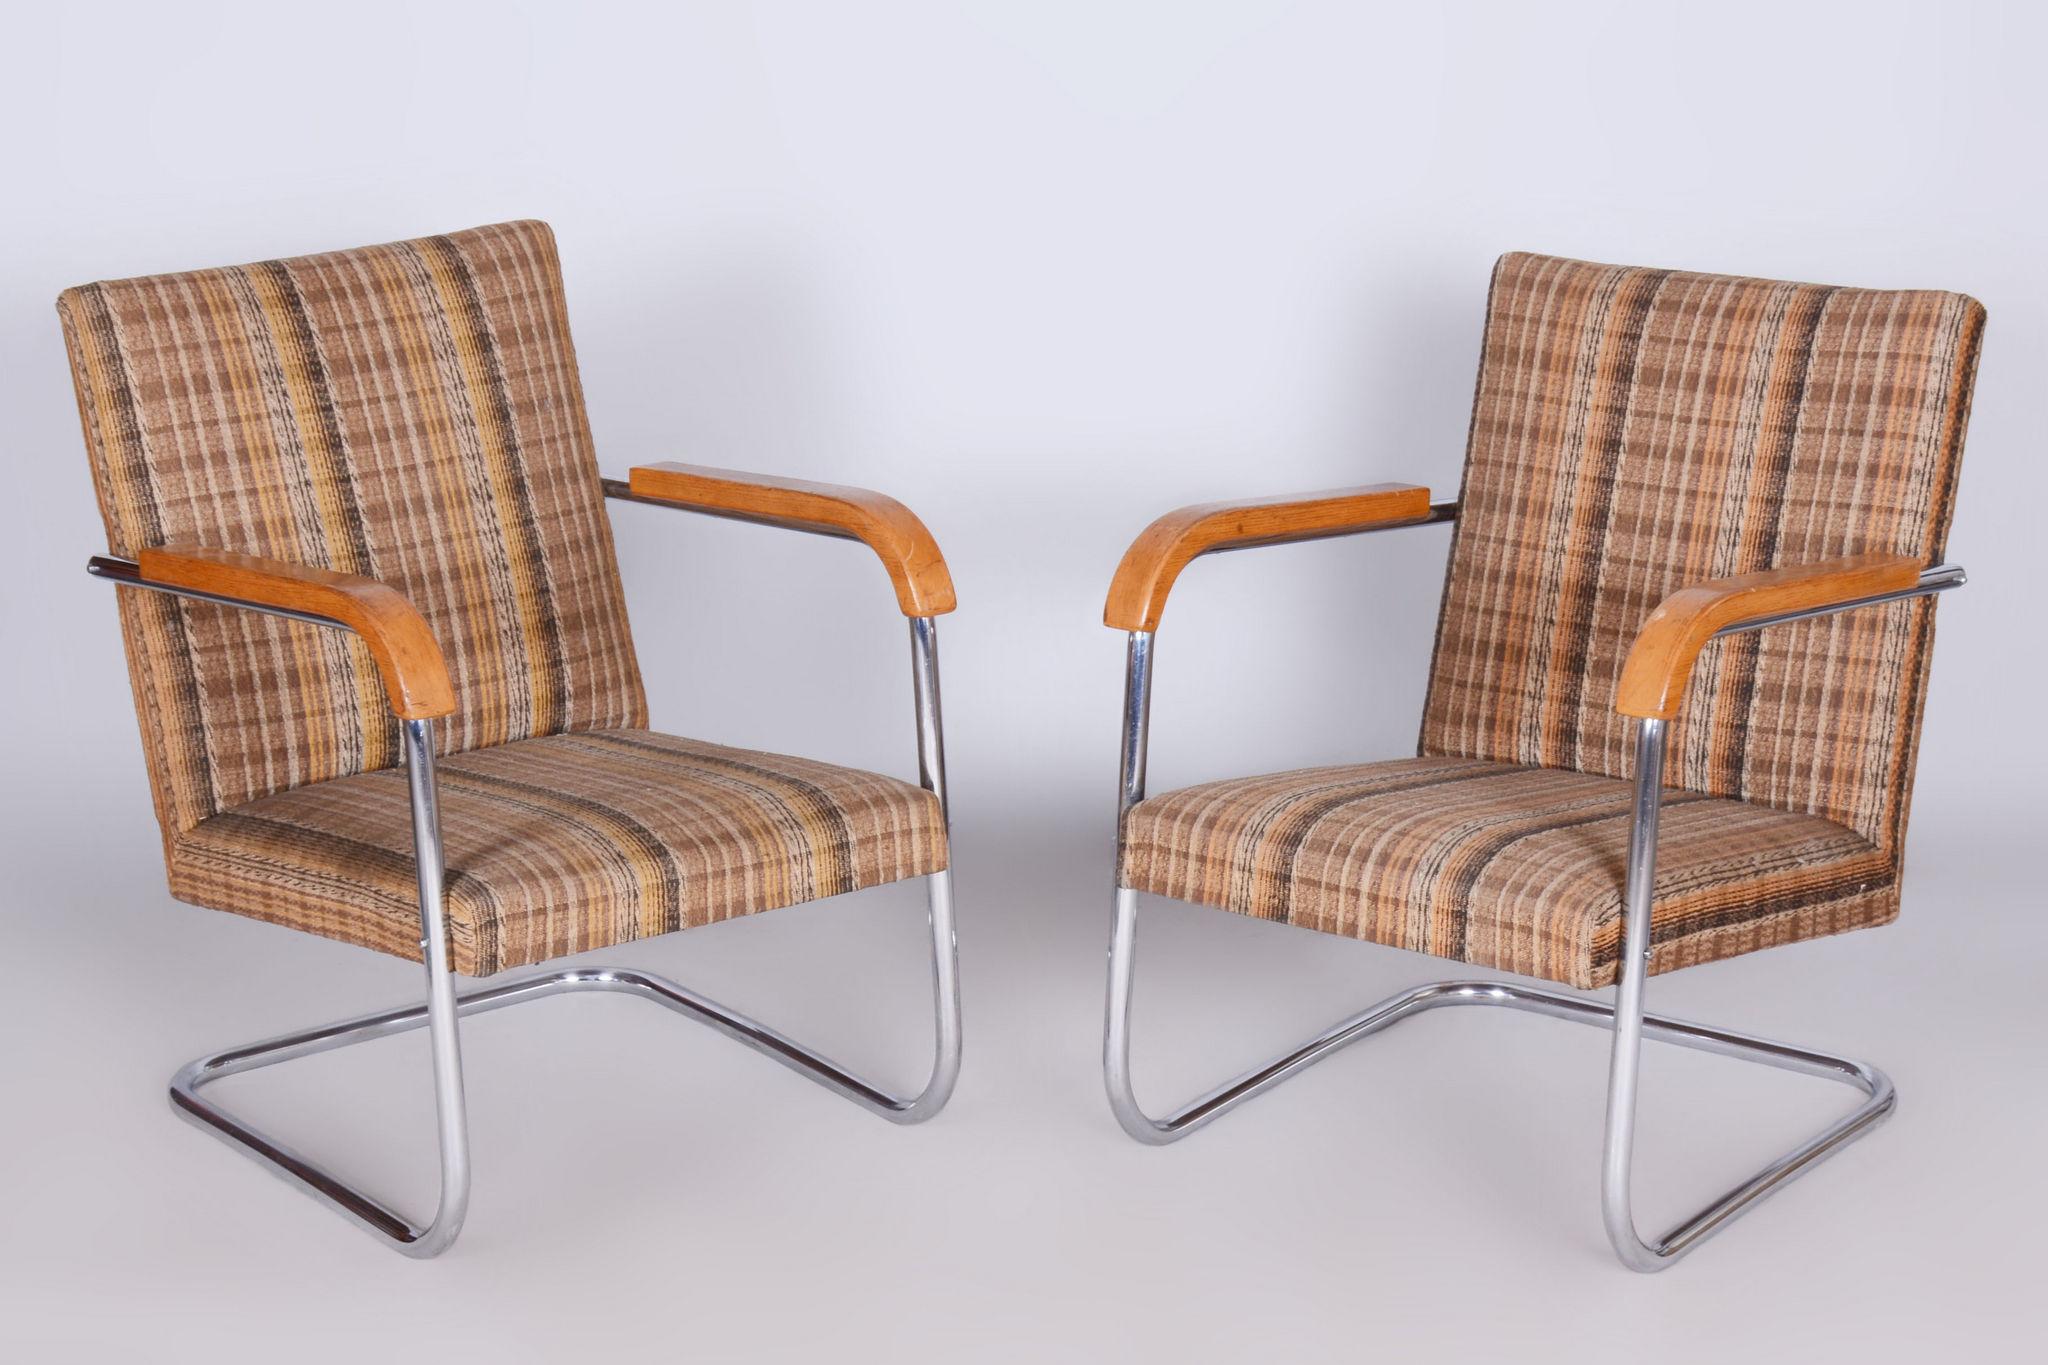 Pair of original armchairs from Czechoslovakia, 1930-1939.

In pristine original condition, the upholstery has been professionally cleaned, and its polish revived by our refurbishing team in Czechia. 							

This item features classic Bauhaus